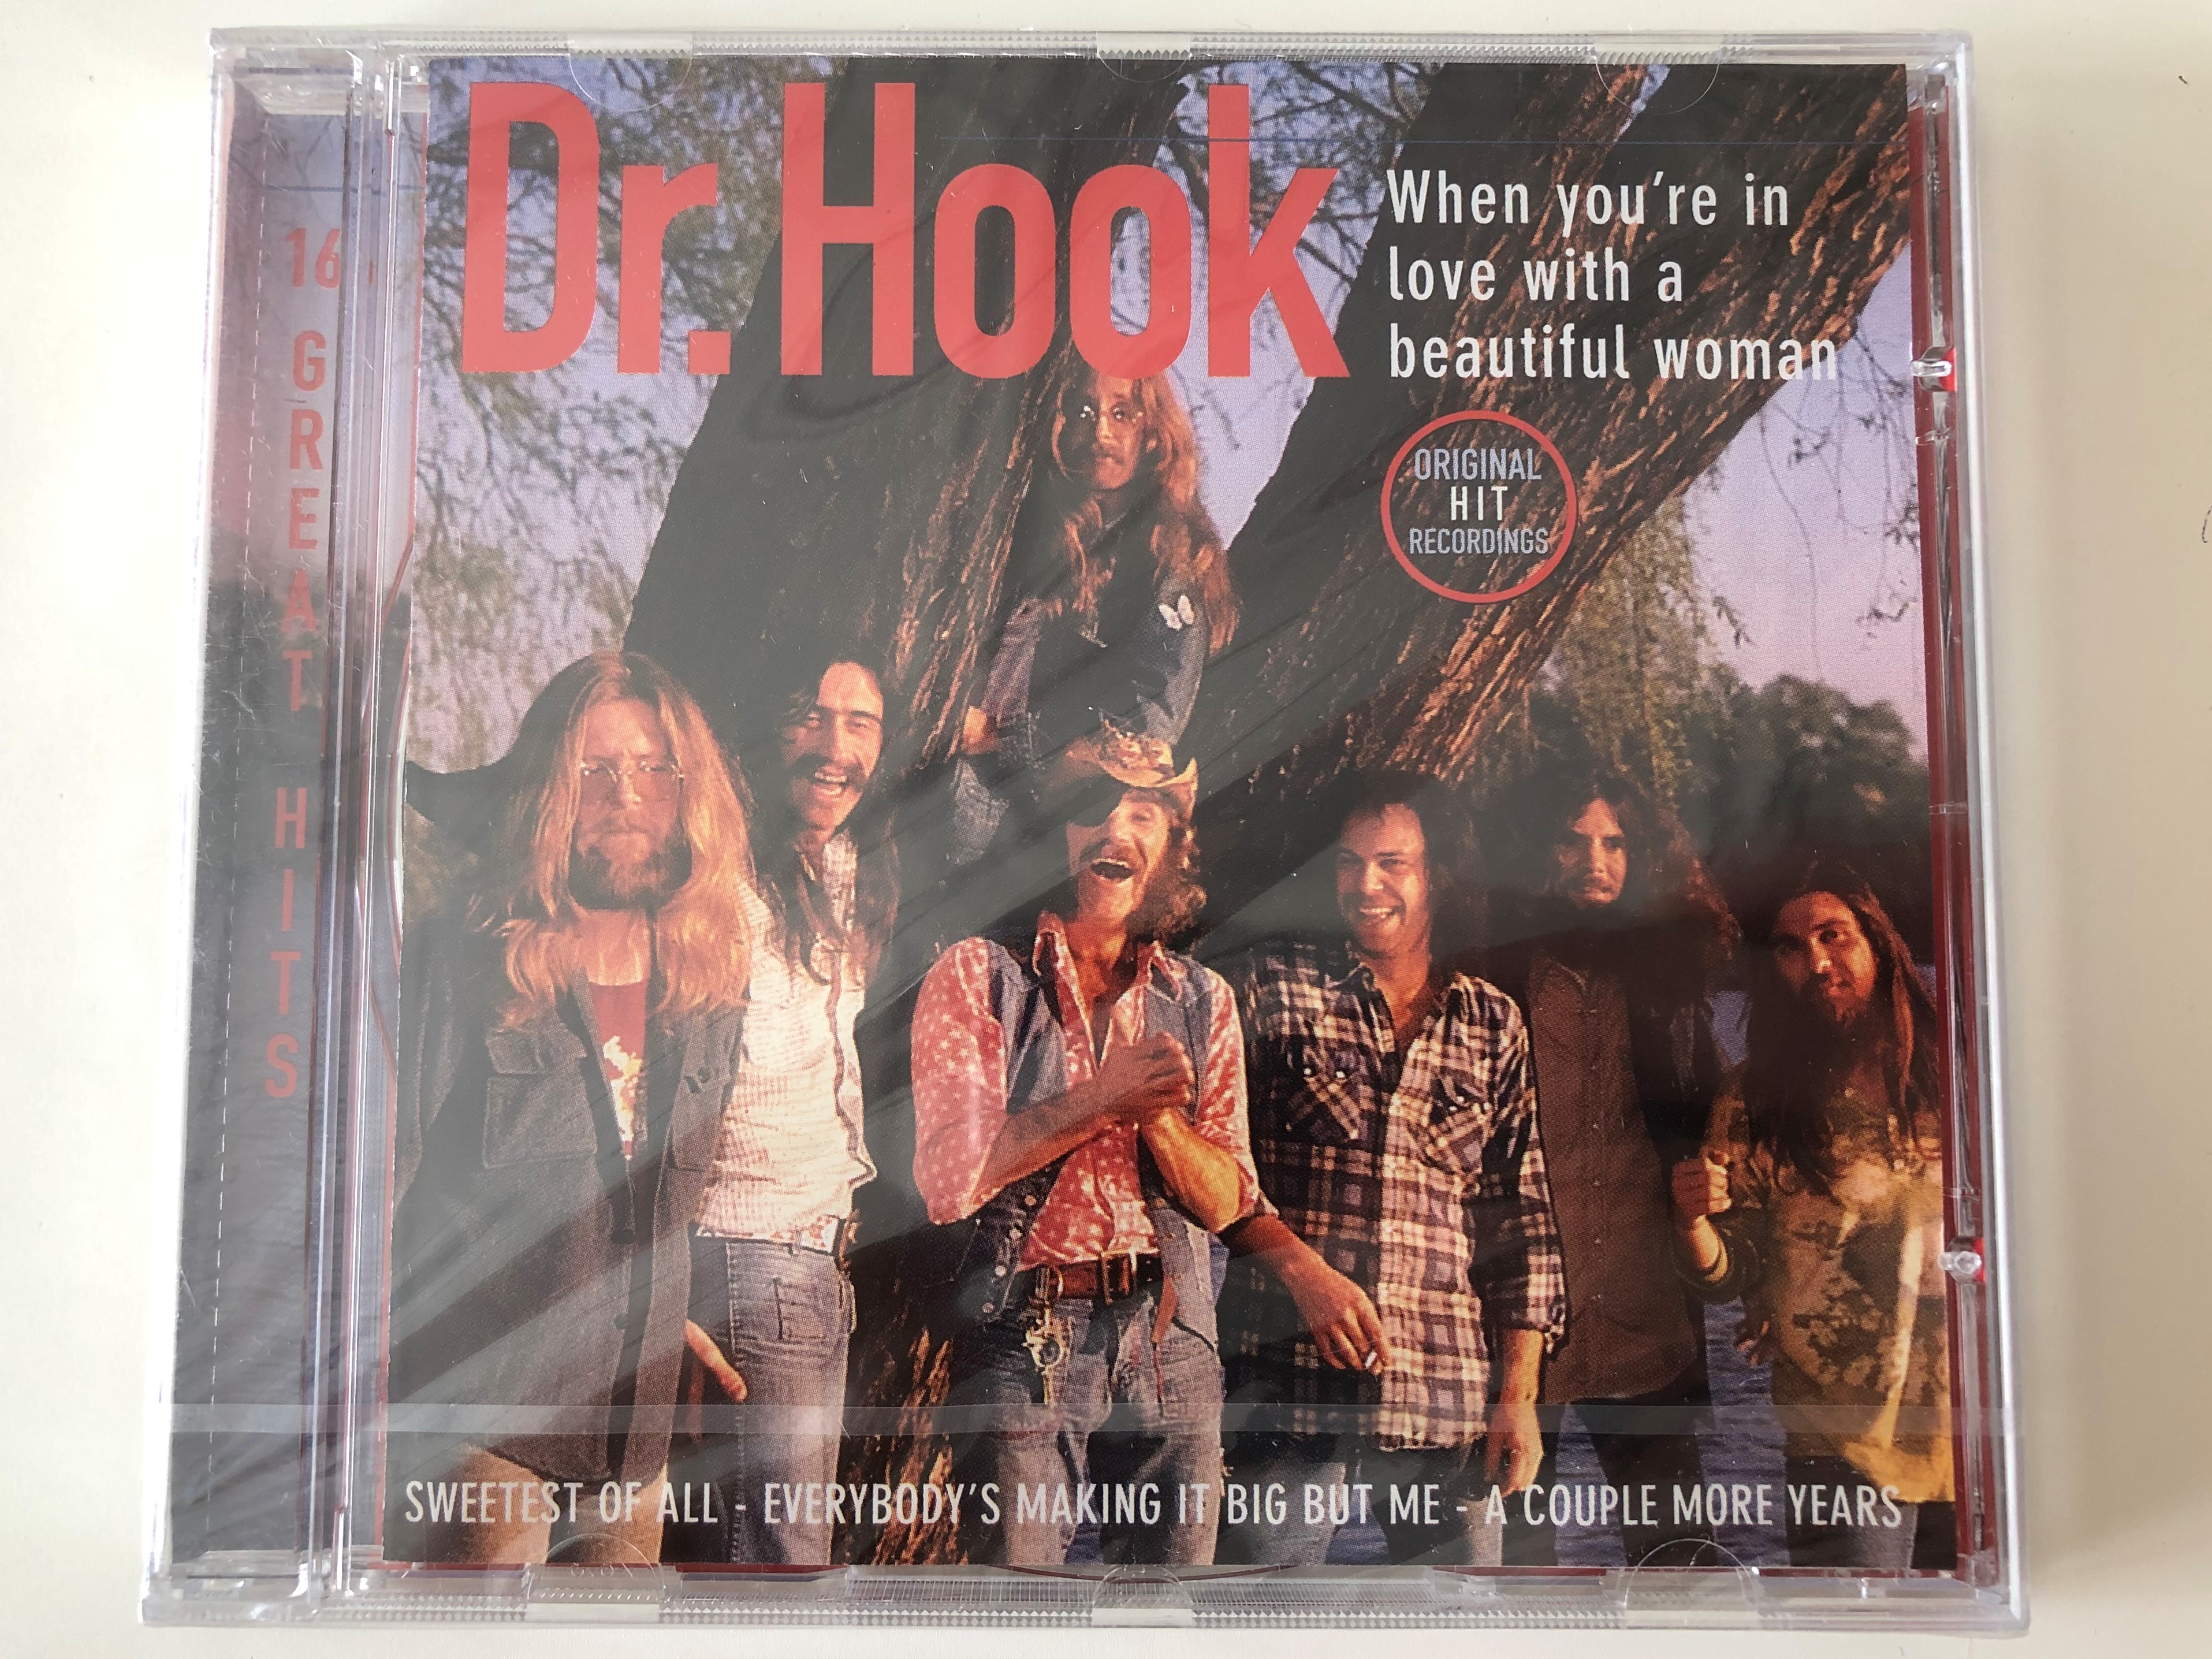 dr.-hook-when-you-re-in-love-with-a-beautiful-woman-sweetest-of-all-everybody-s-making-it-big-but-me-a-couple-more-years-disky-audio-cd-1996-se-864292-1-.jpg